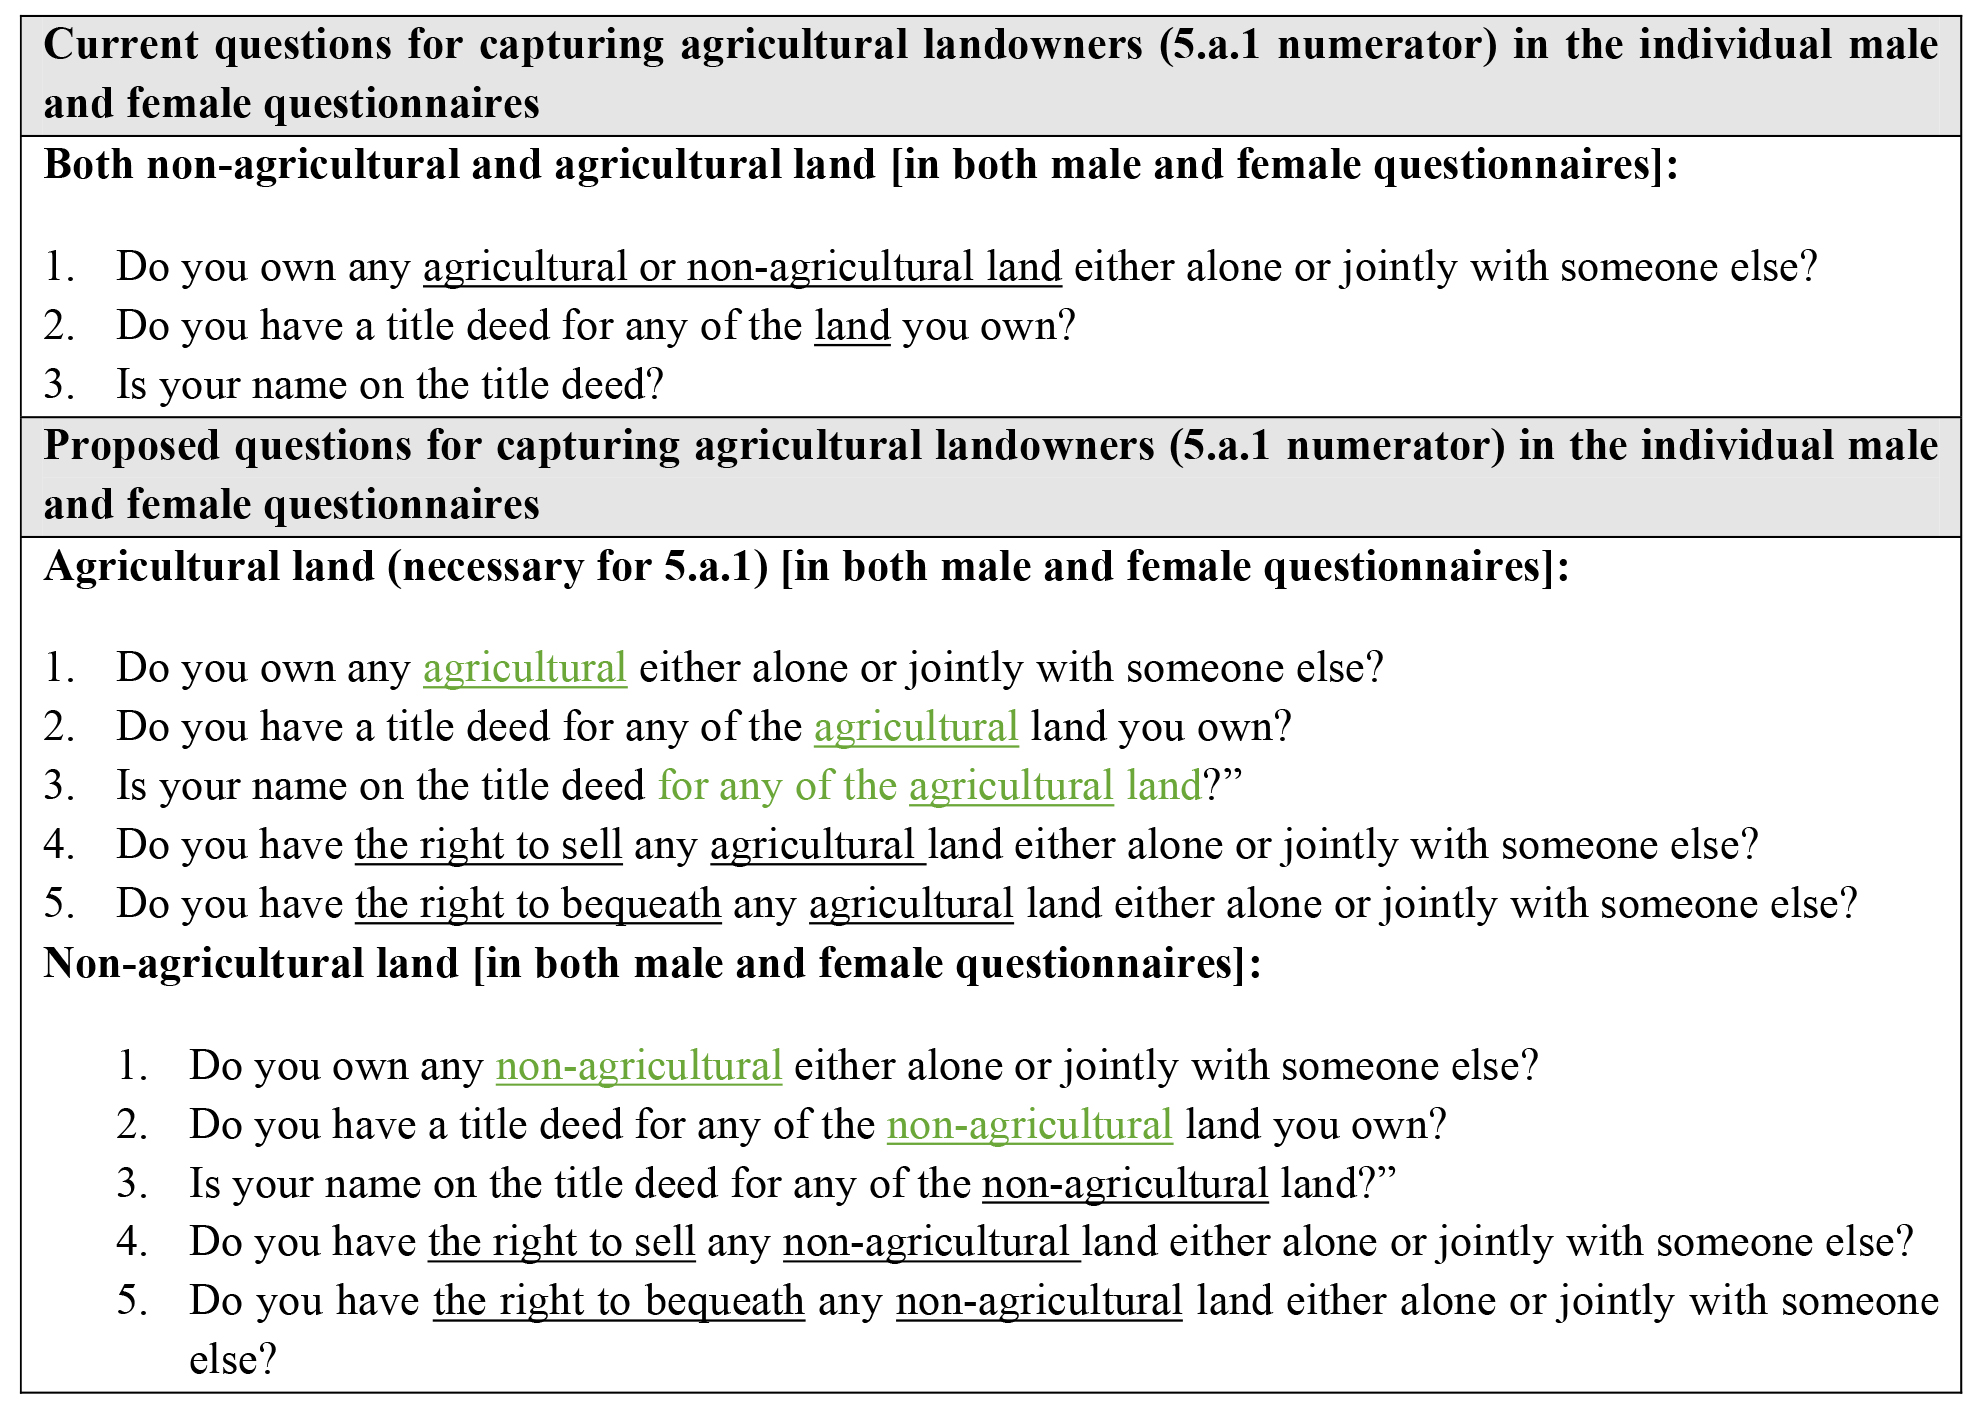 Proposal for improving questions capturing land ownership according to 5.a.1 definitions.